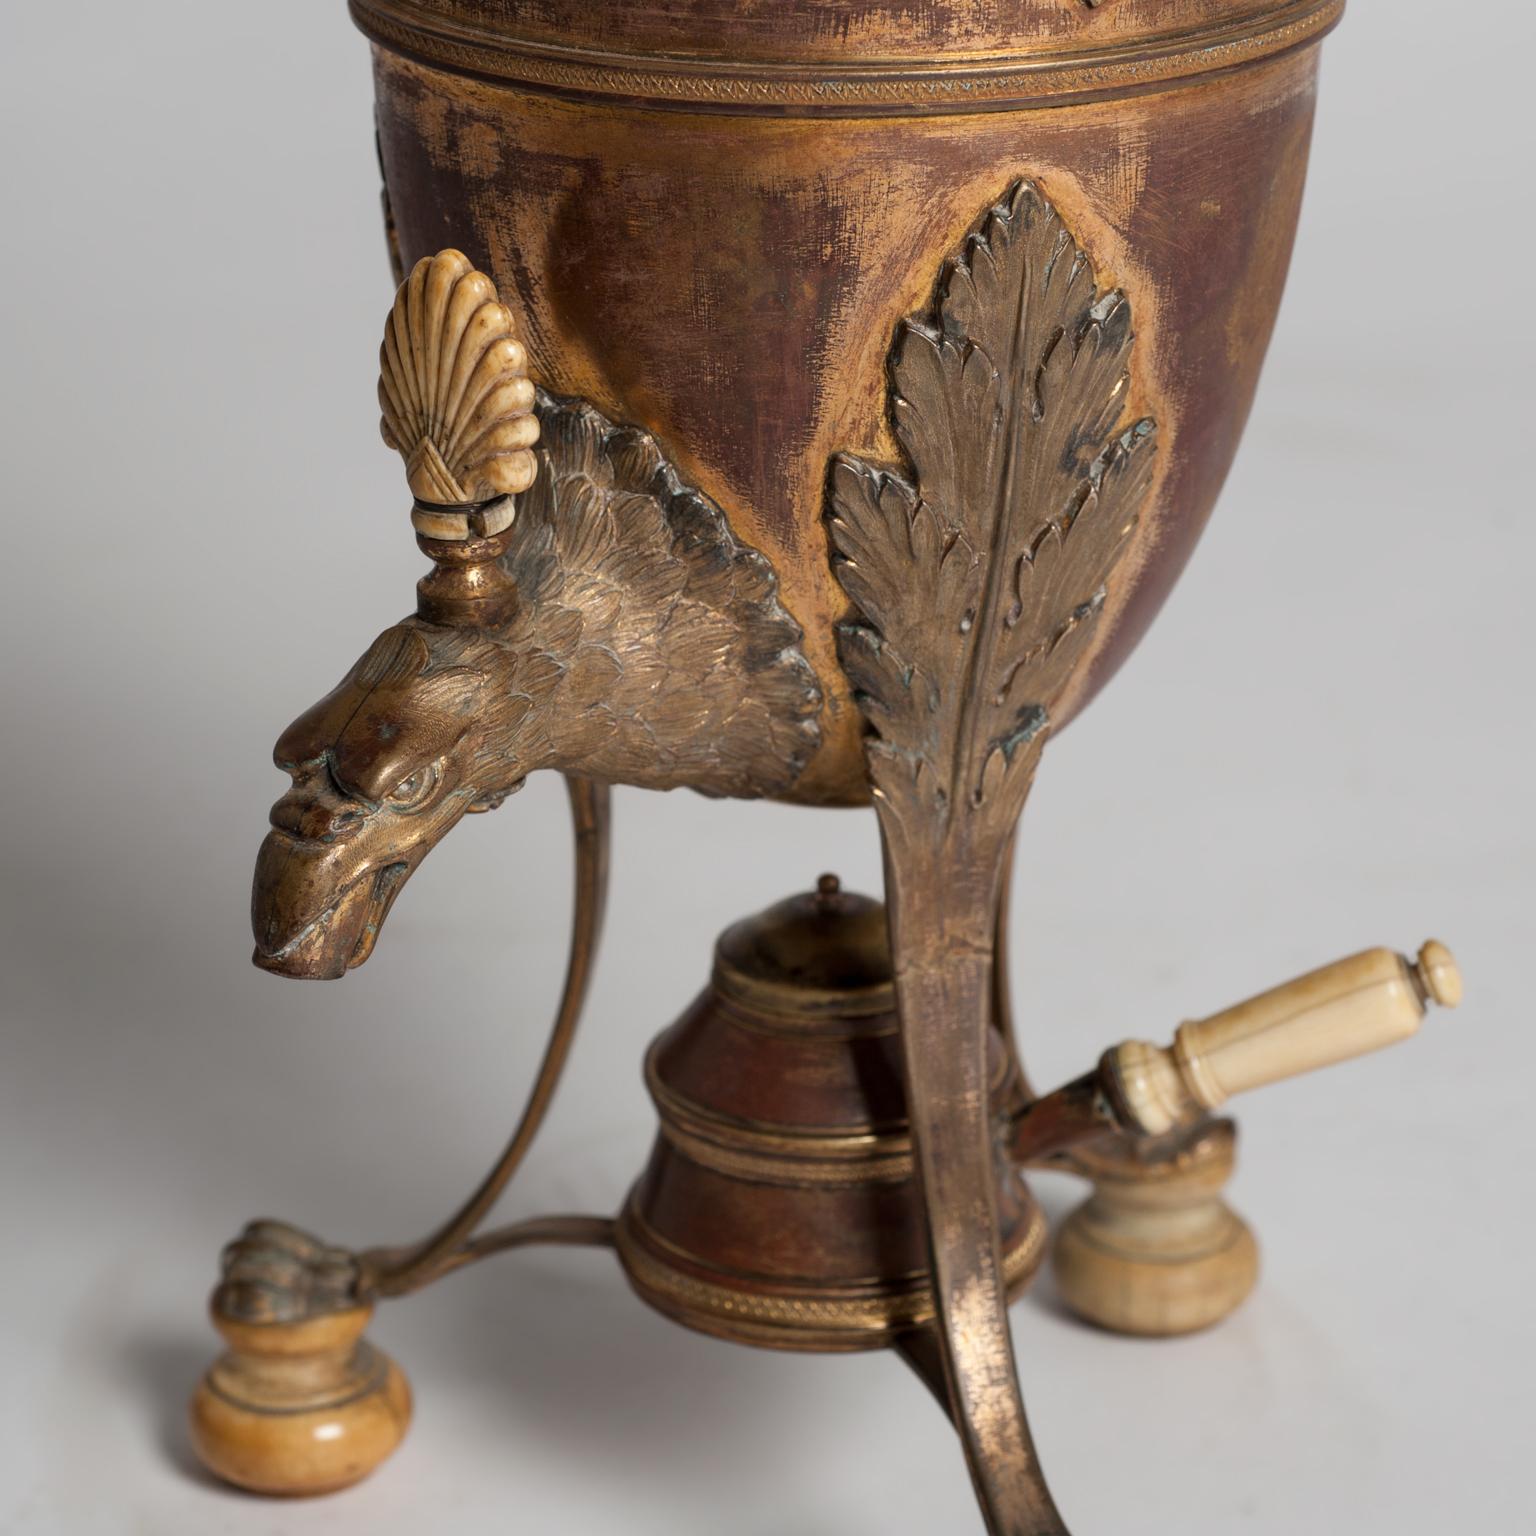 Samovar or coffee urn in copper and bronze signed by George Falkenberg, with Empire-style design, composed of a central body supported on three legs that end in the form of an eagle's claw and a bone base. The samovar's fountain has the shape of an